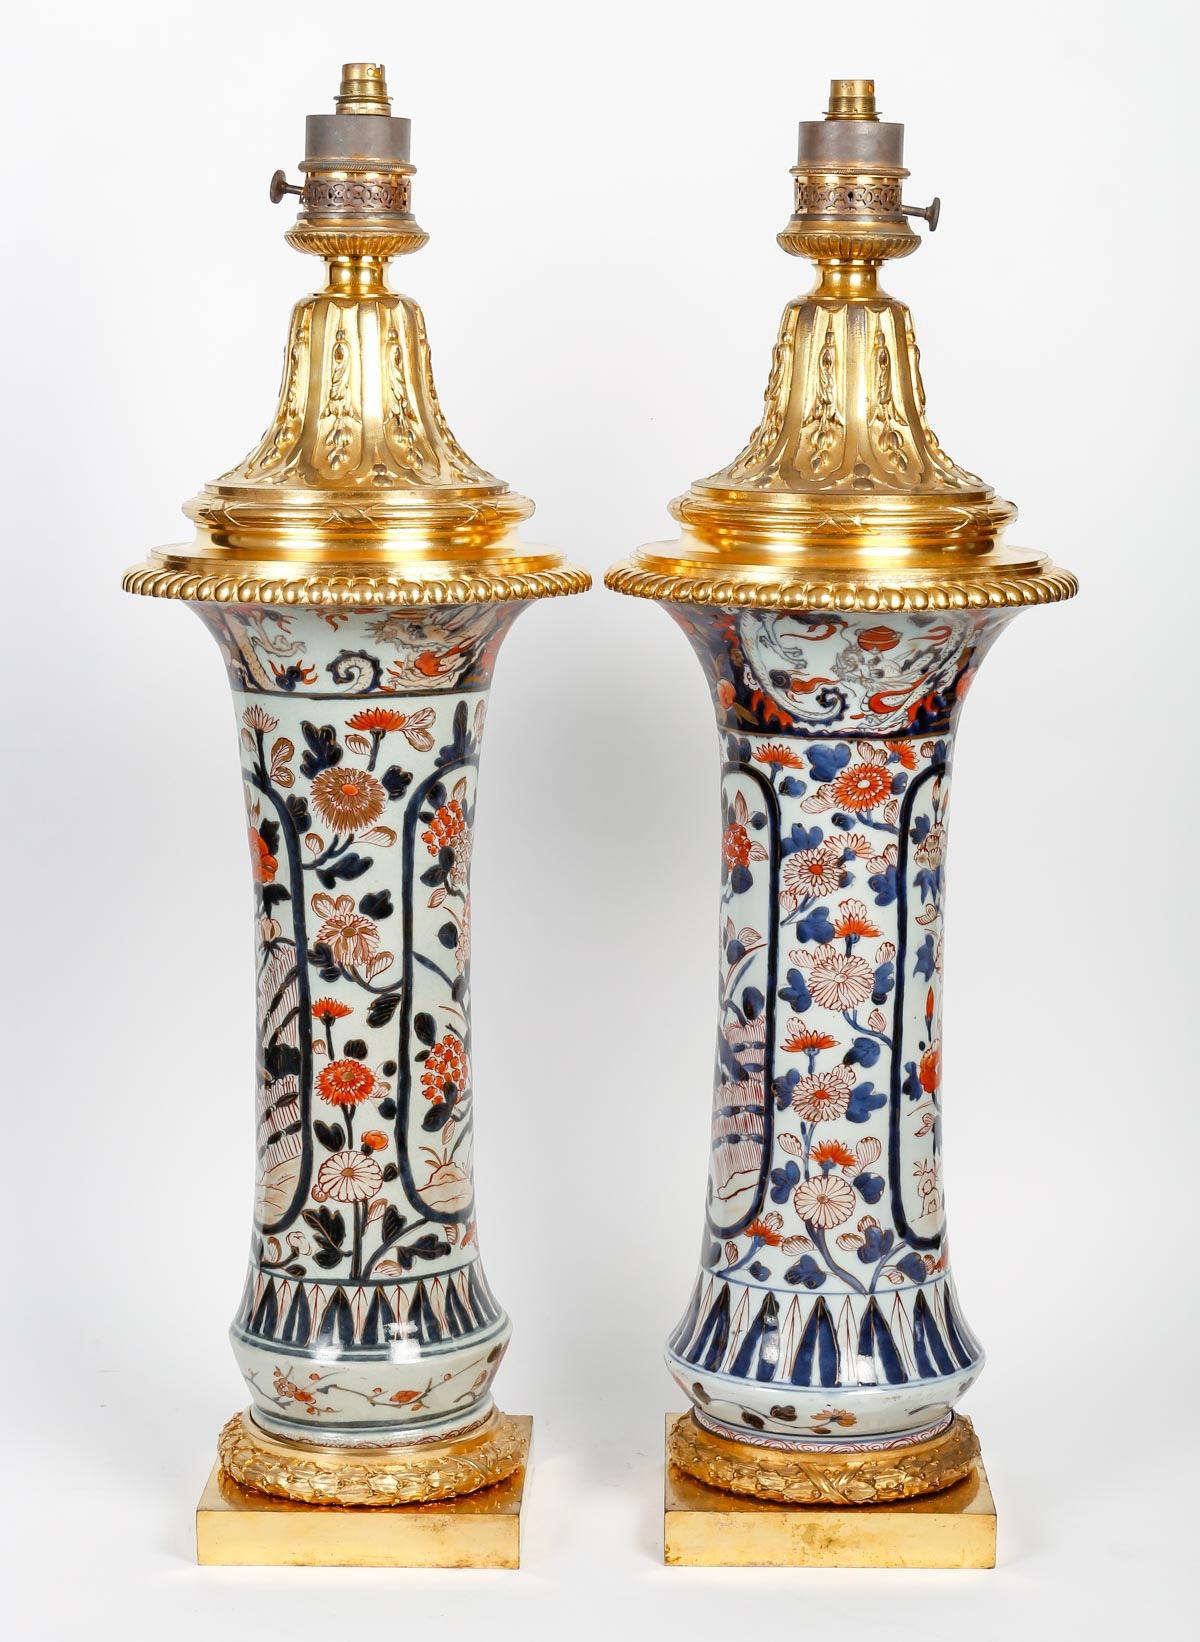 Pair of large Japanese Porcelain Cone Shape Vases with Imari decoration
Important mounts in ormolu and gilded metal, the base decorated with a laurel wreath, the upper part of falling leaves and a frieze of knotted ribbon.
The mounts signed Gagneau,